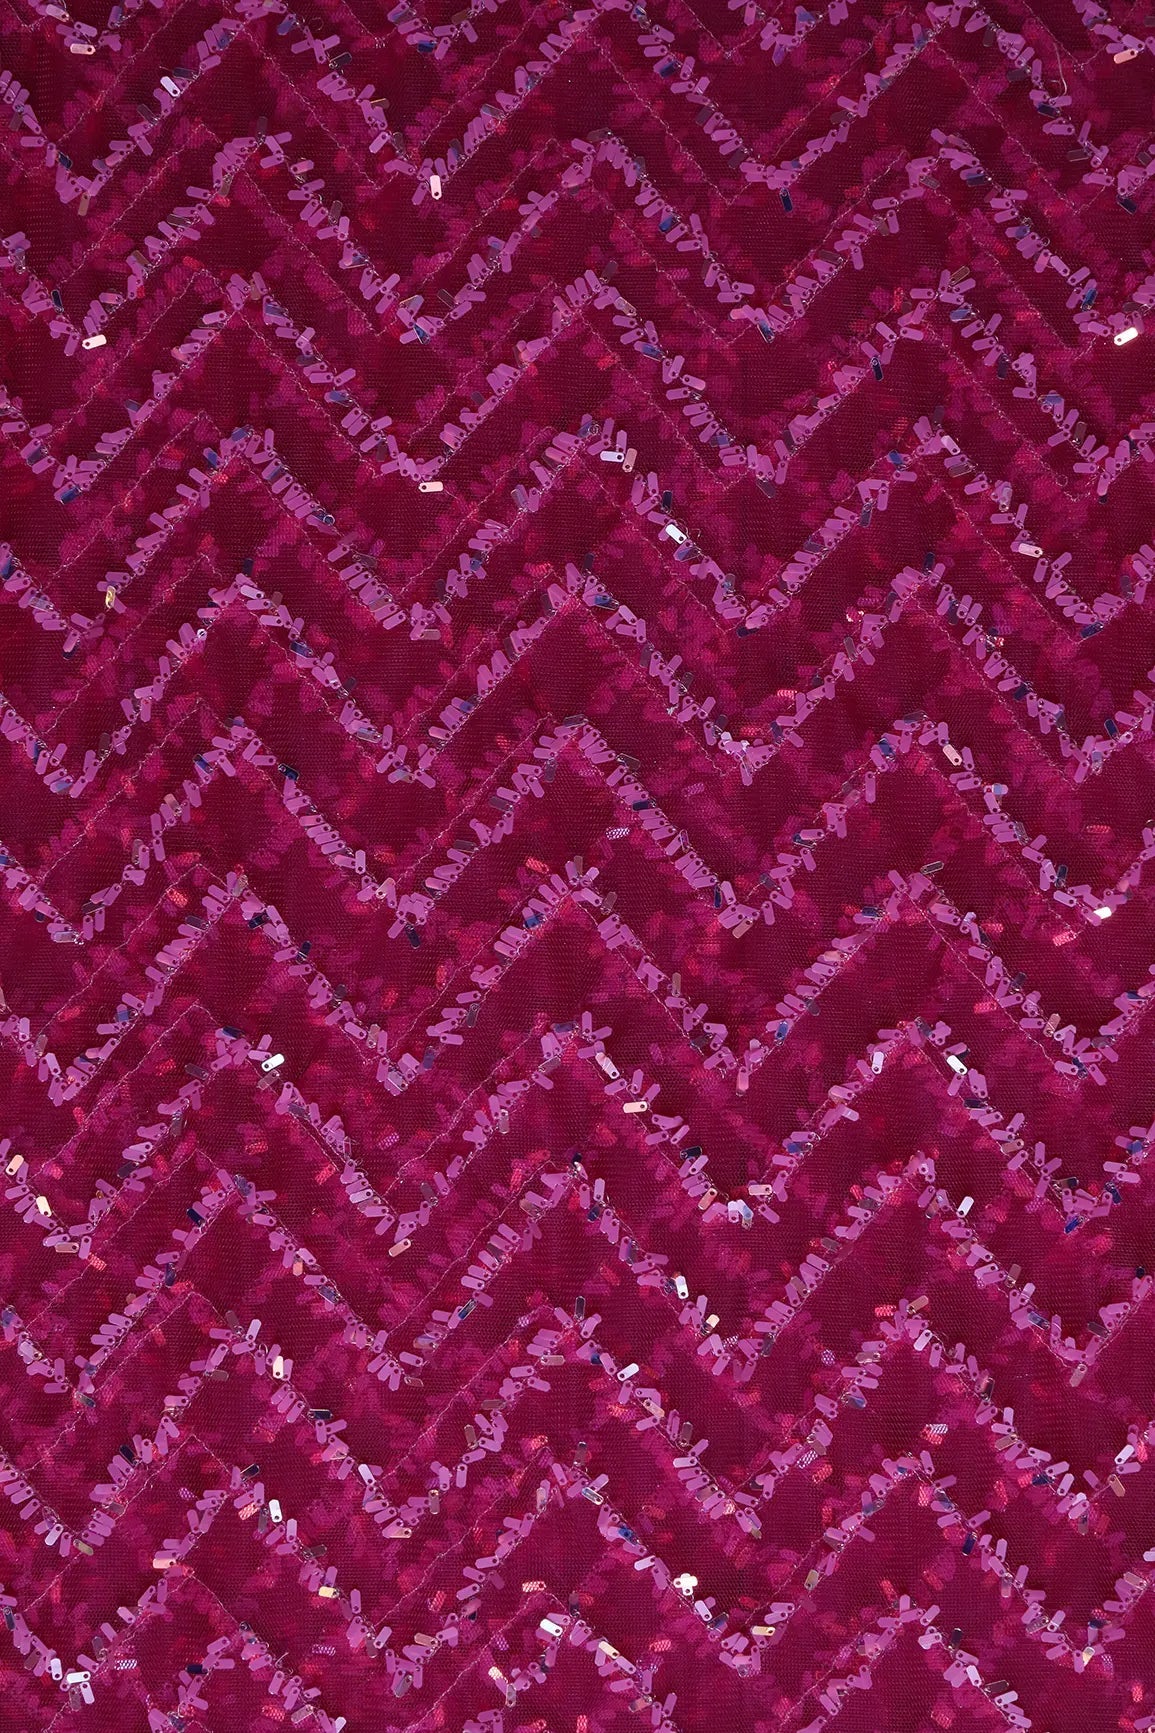 2 Meter Cut Piece Of Oval Sequins Chevron Embroidery Work On Fuchsia Soft Net Fabric - doeraa